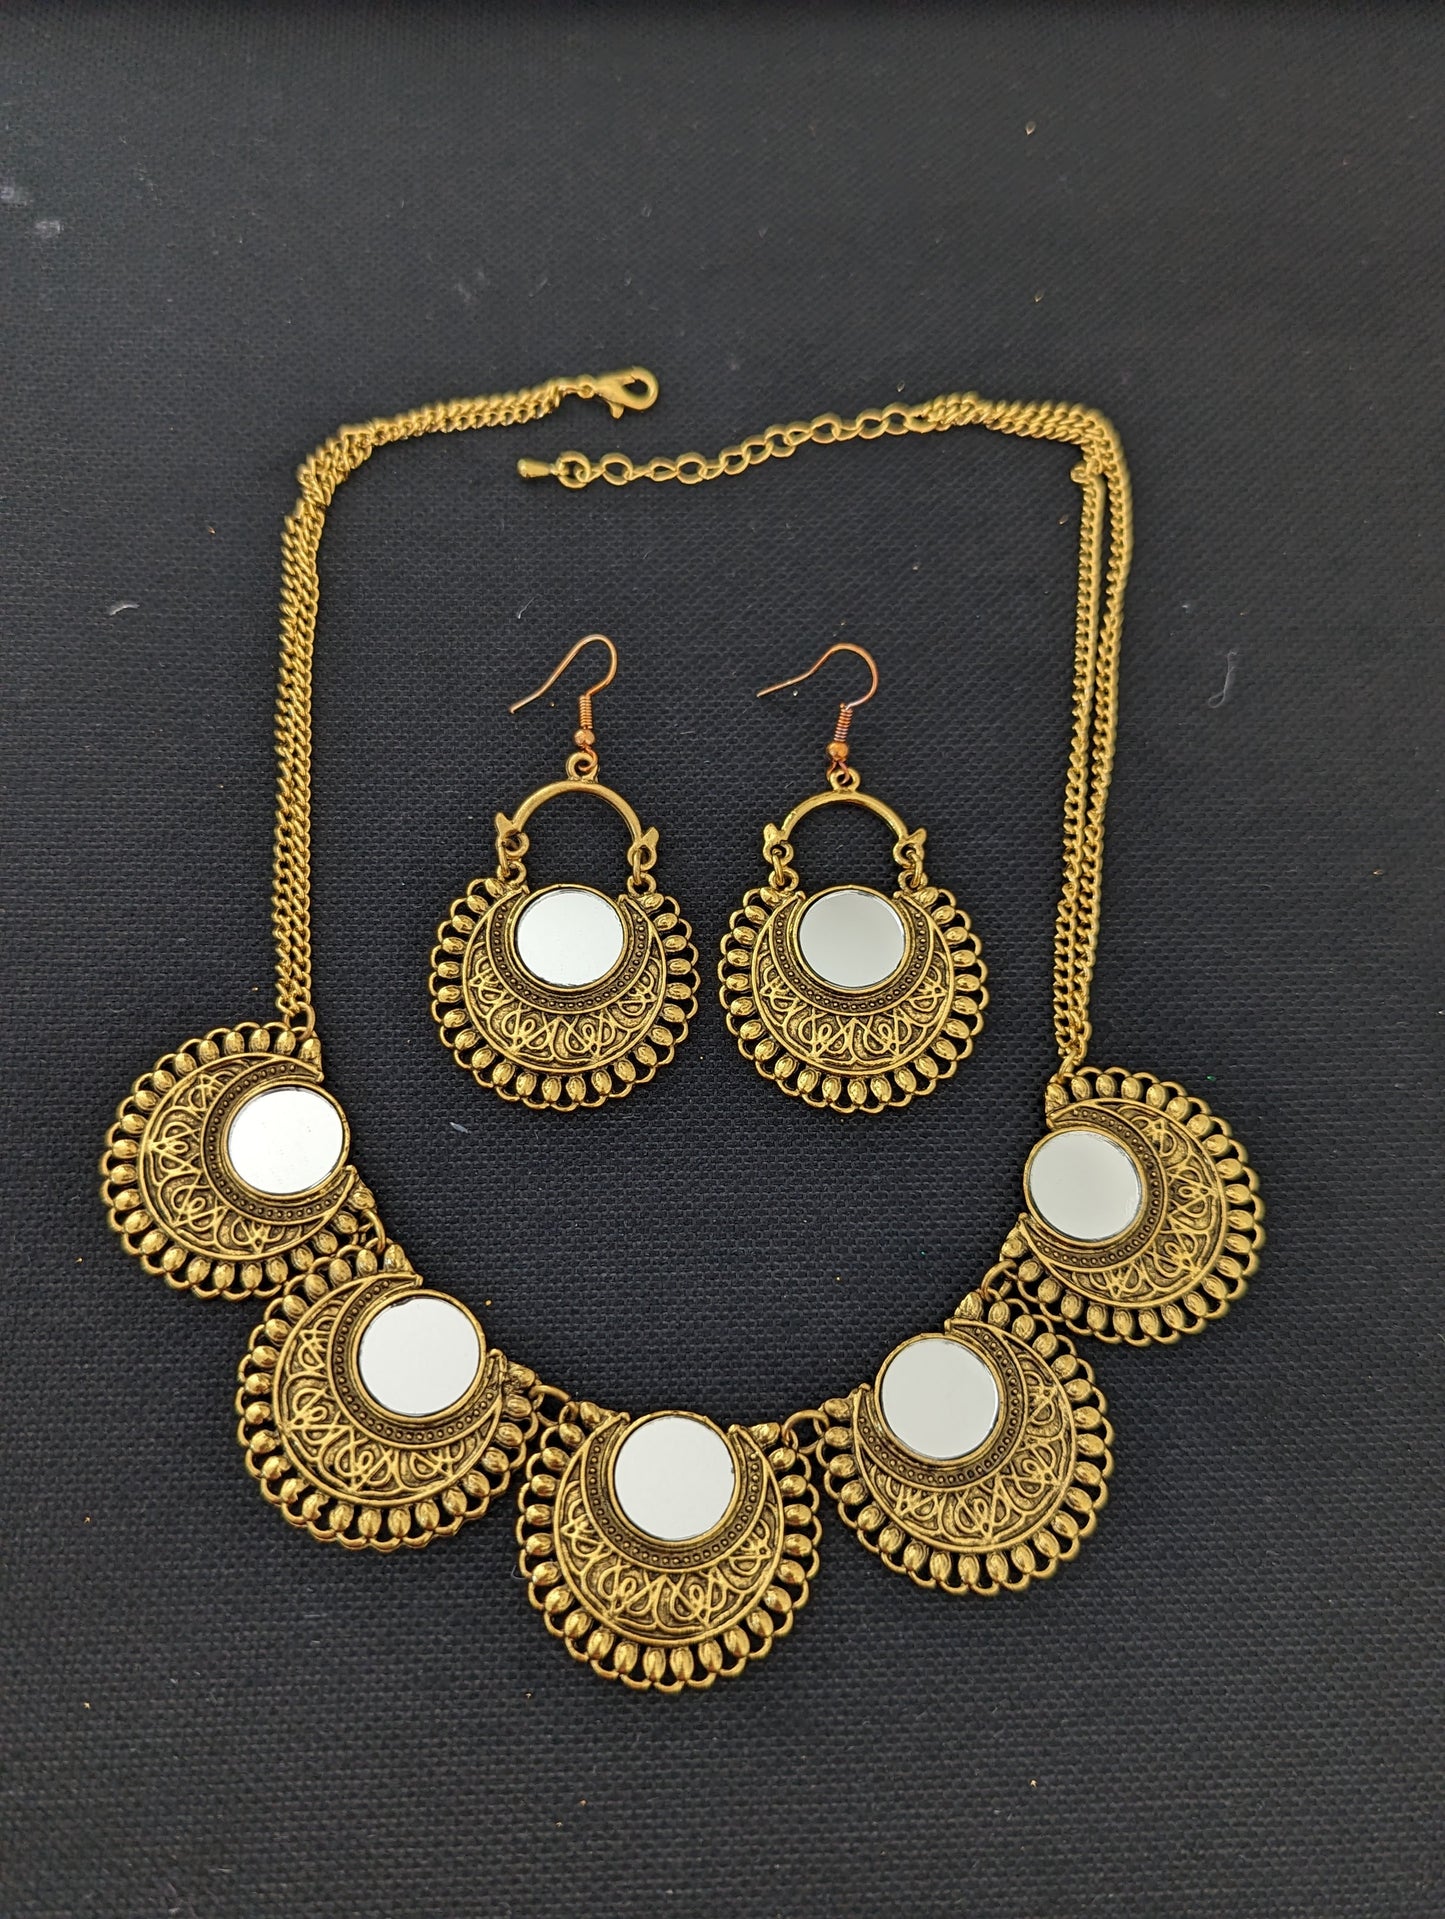 Antique gold mirror chain necklace and earring set